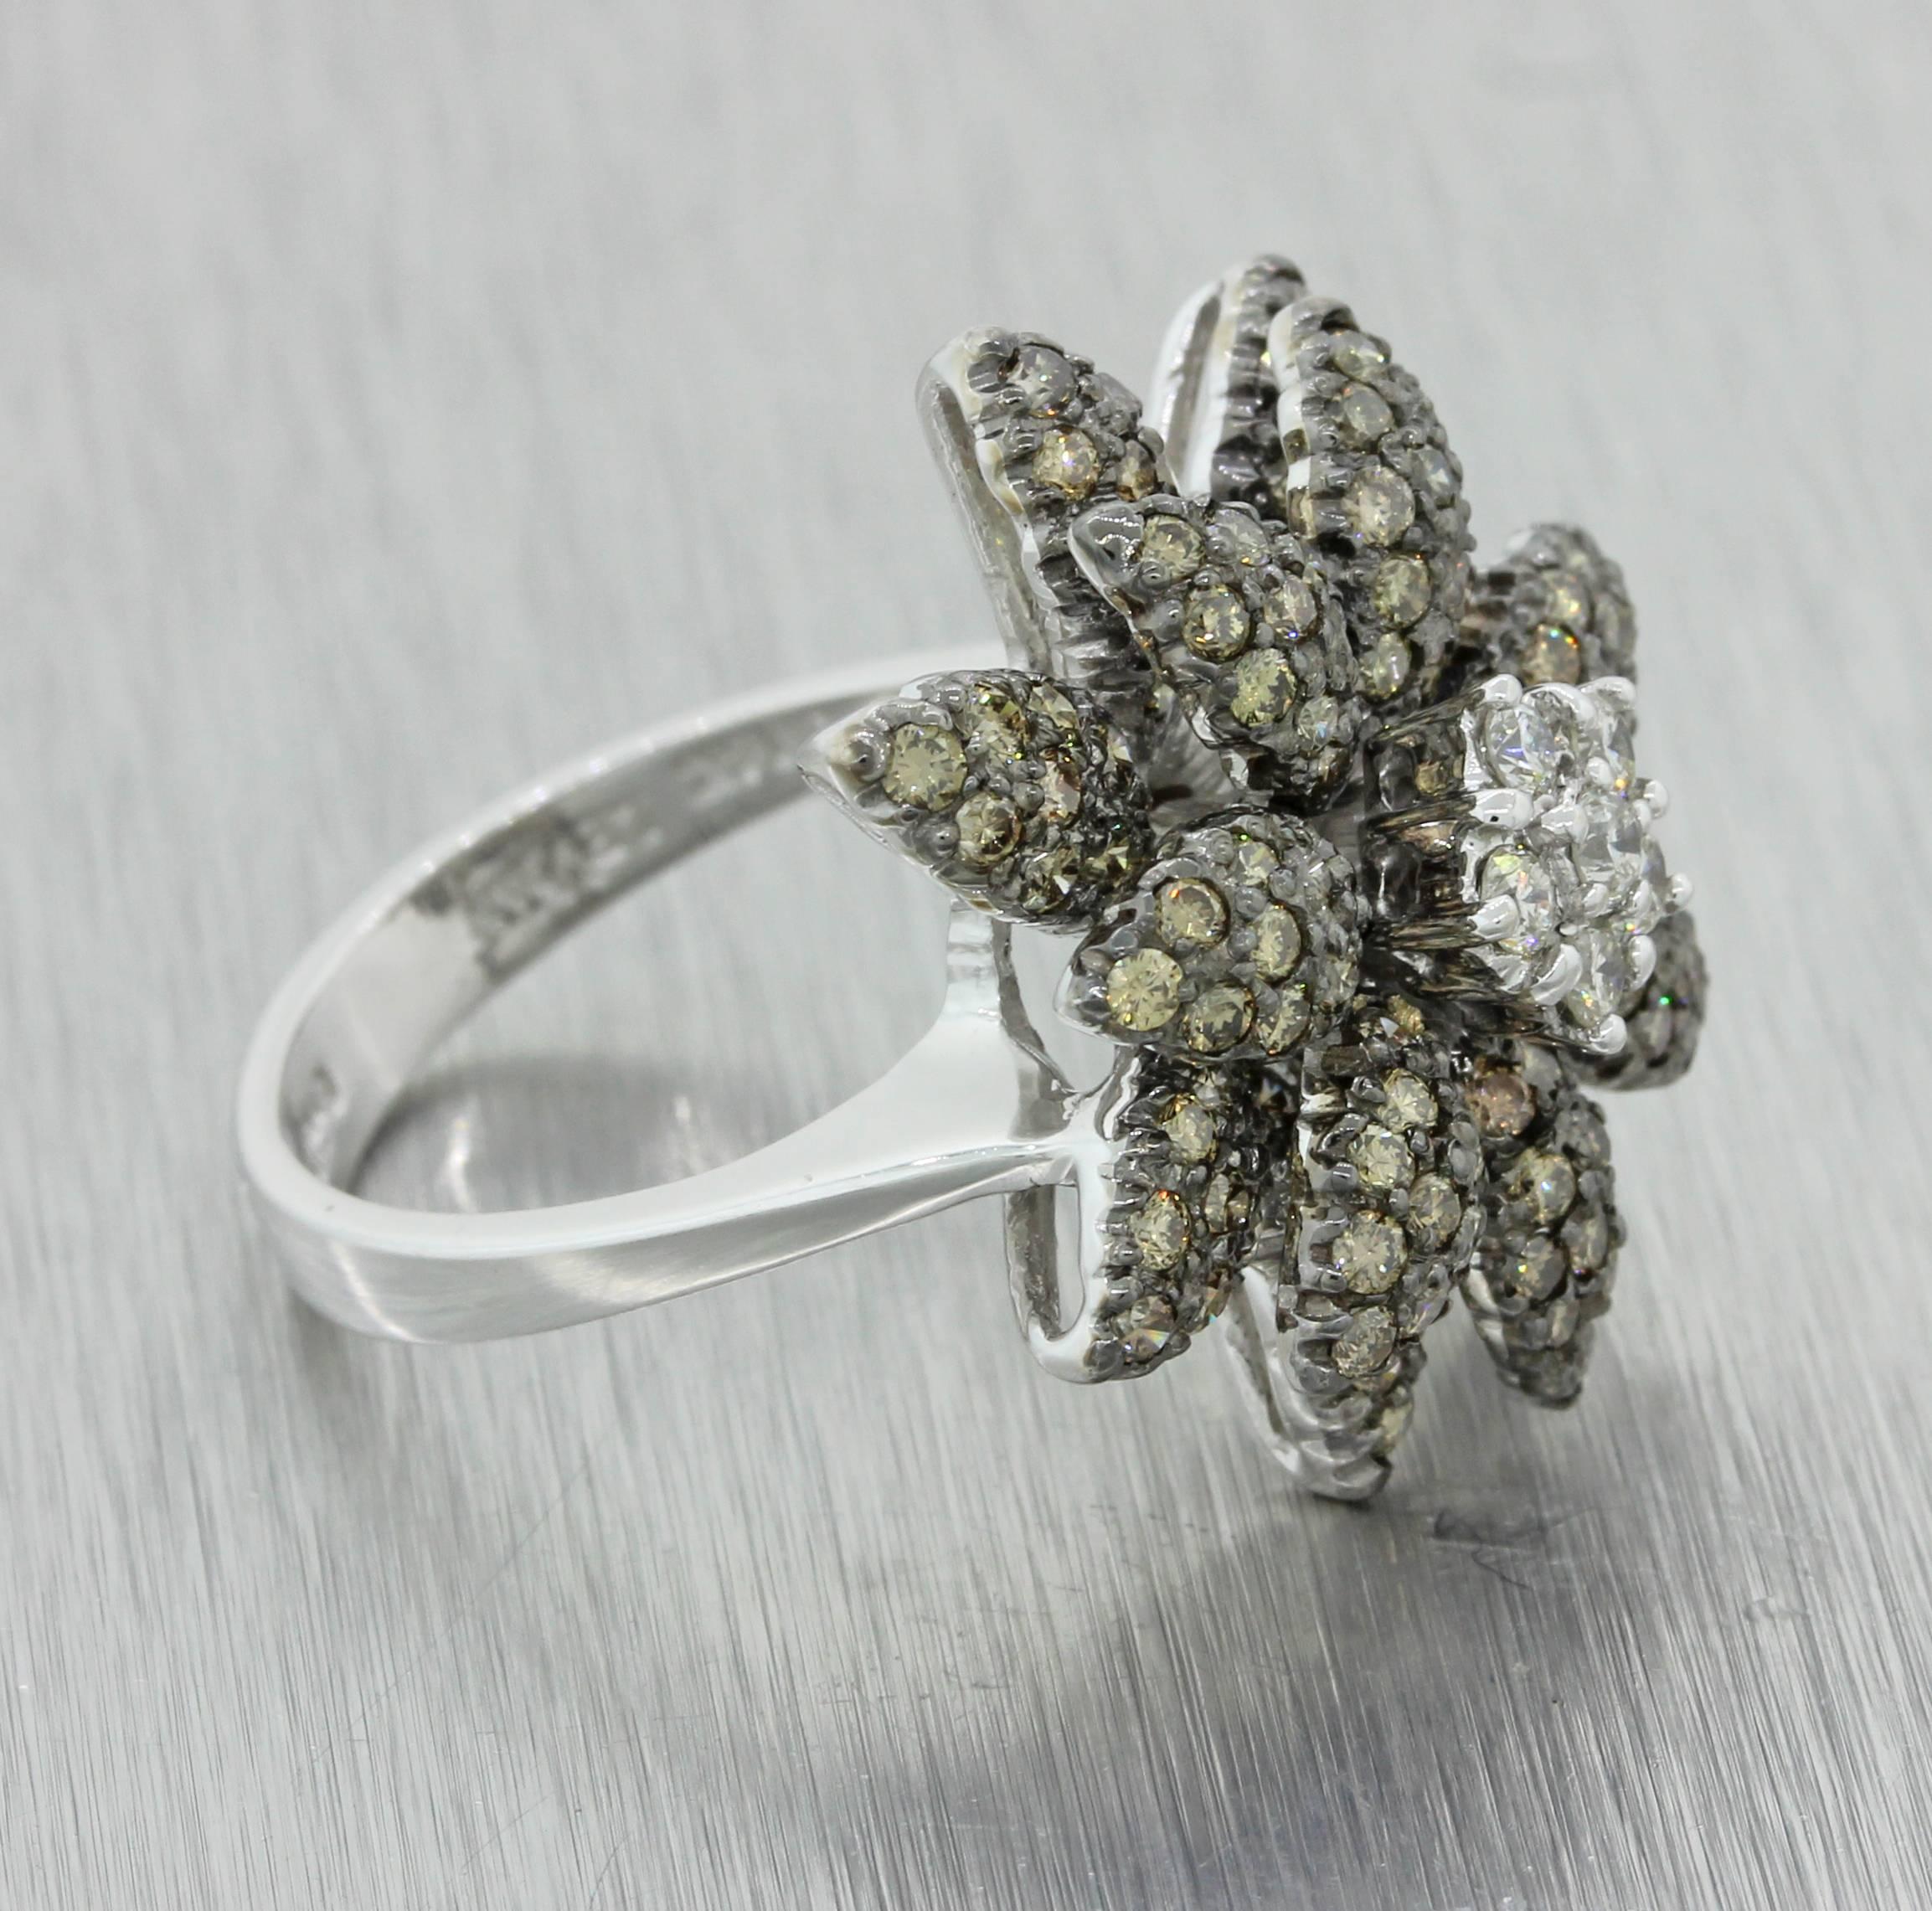 This is a beautiful Modern Estate LeVian 14k White Gold 2.15ctw Chocolate White Diamond Flower Cluster Ring. Retail Price: $4075.00 It will come professionally packaged in a beautiful ring presentation box and our unconditional 30day money-back